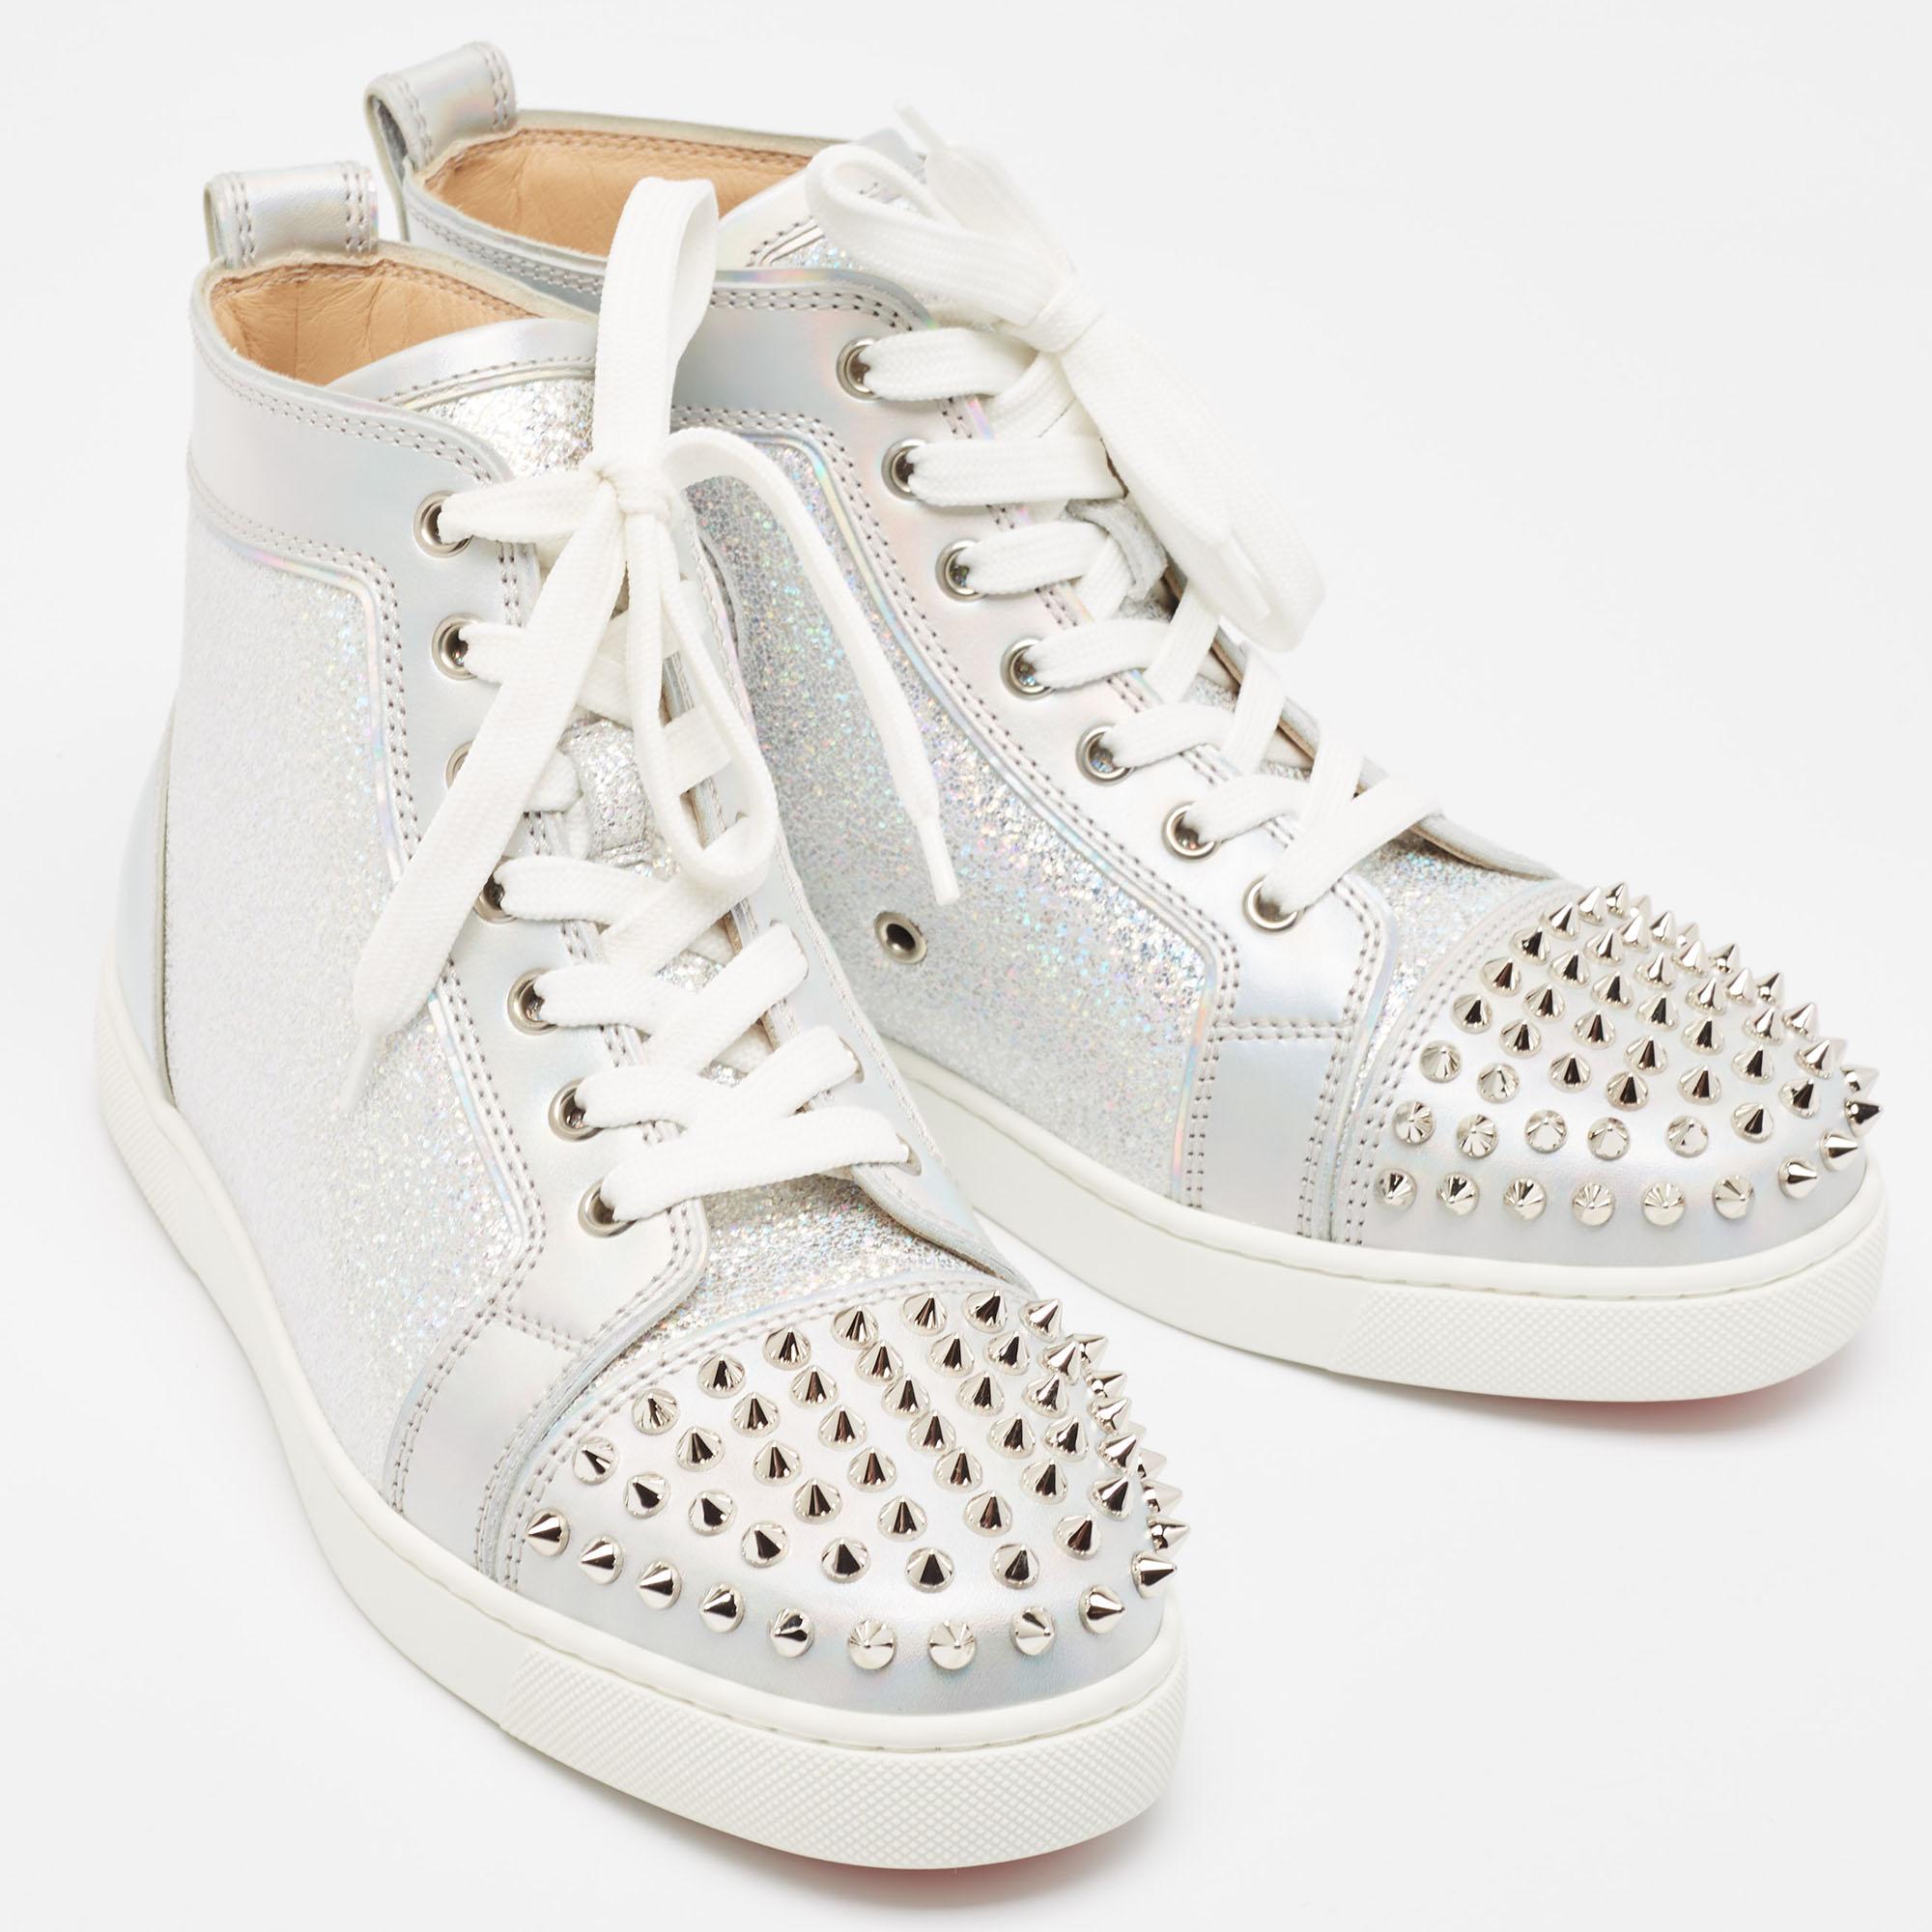 Christian Louboutin Leather and Glitter Suede Lou Spikes Sneakers Size 39 In Excellent Condition For Sale In Dubai, Al Qouz 2